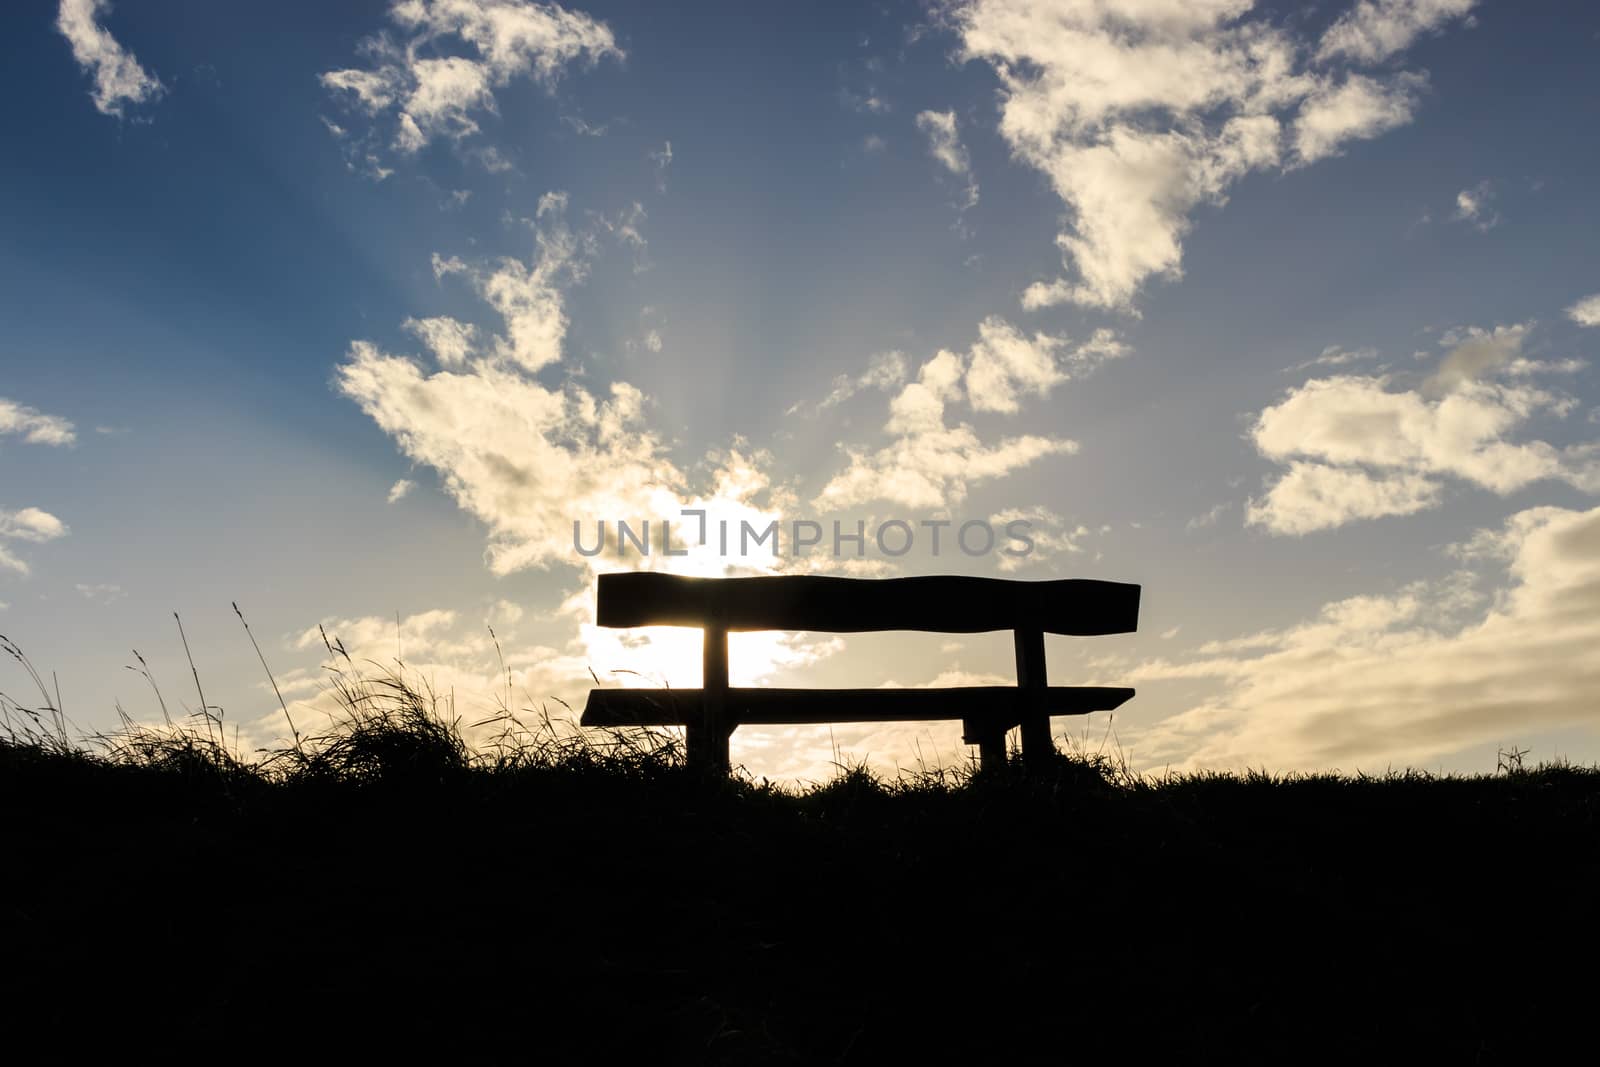 Thoughtful and peaceful silhouette wooden bench and grass with a blue and white soft fluffy sky in the background, light rays